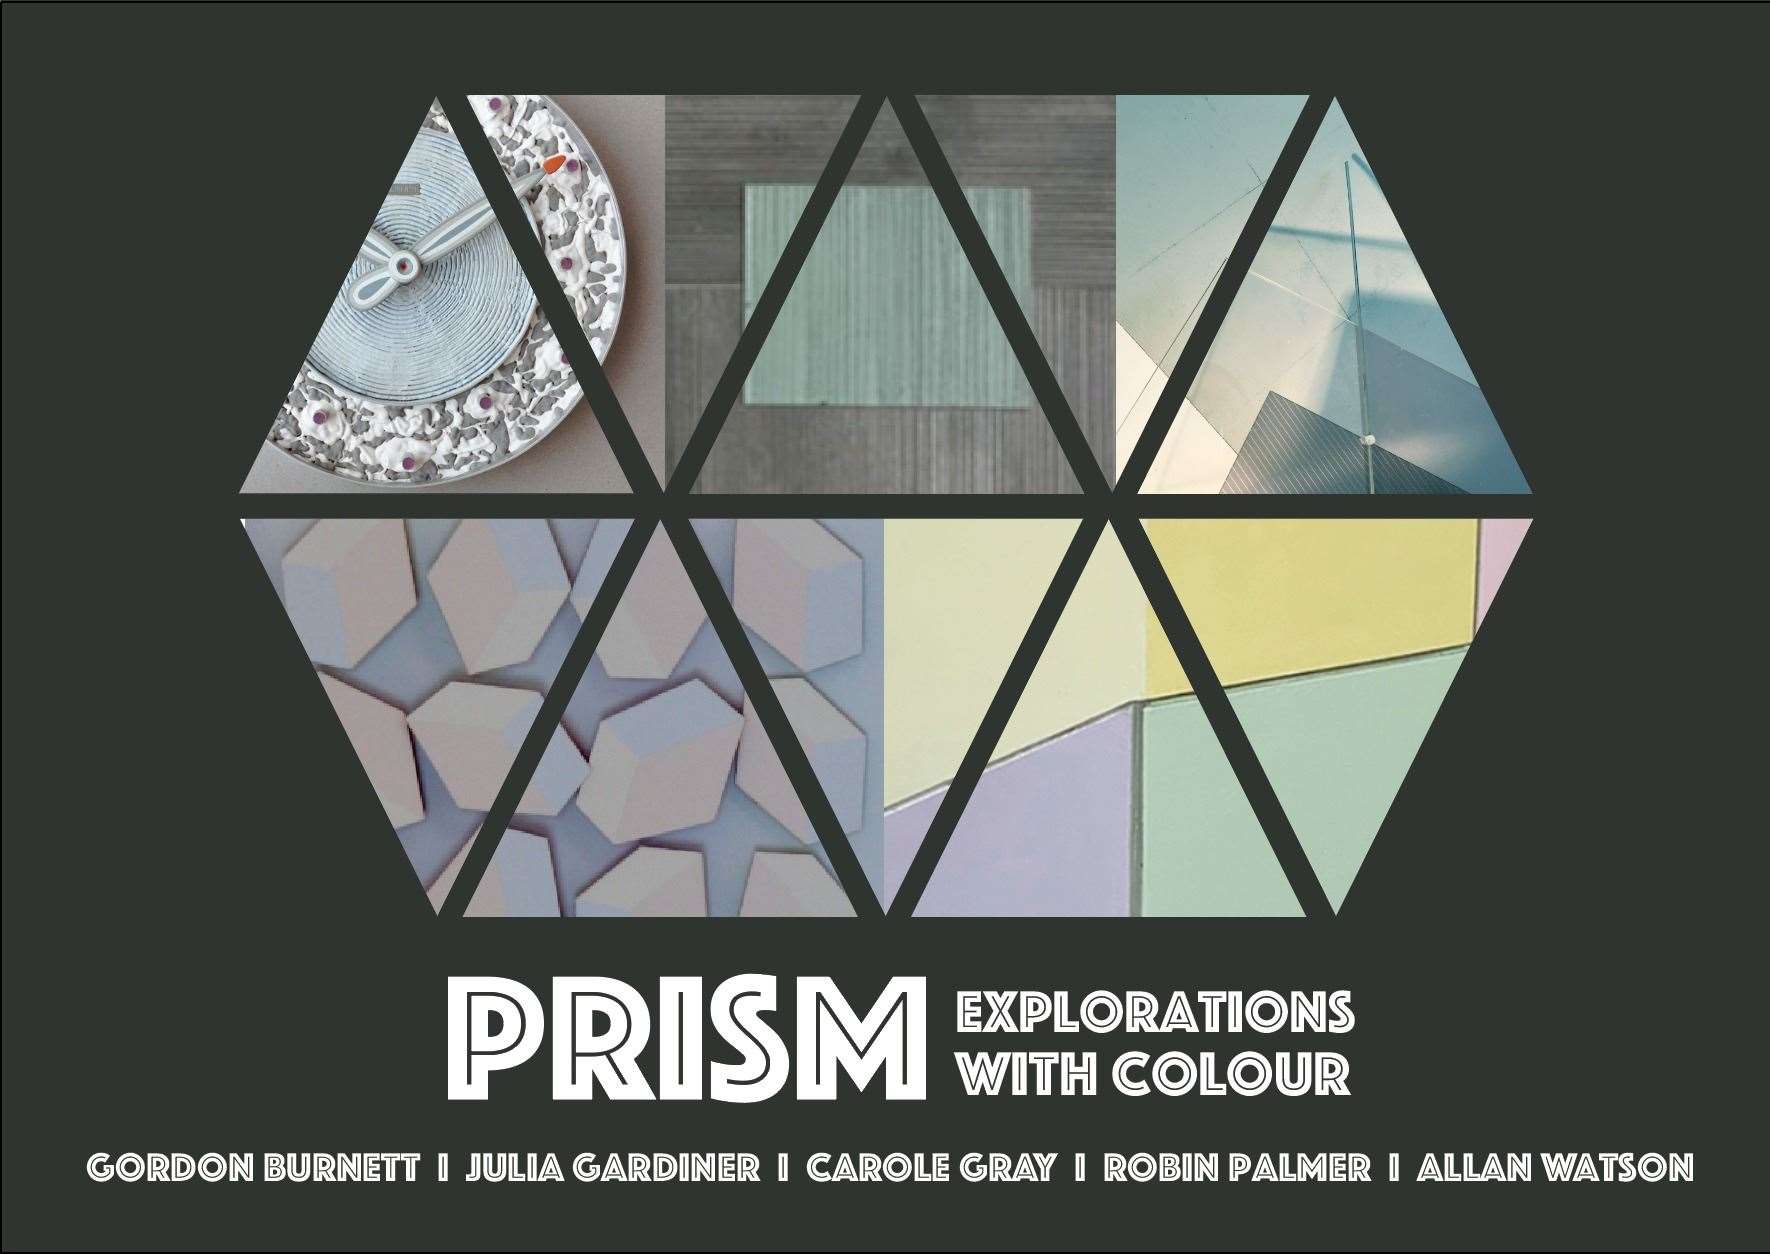 The 'Prism' exhibition gets under way this evening and runs until Sunday.